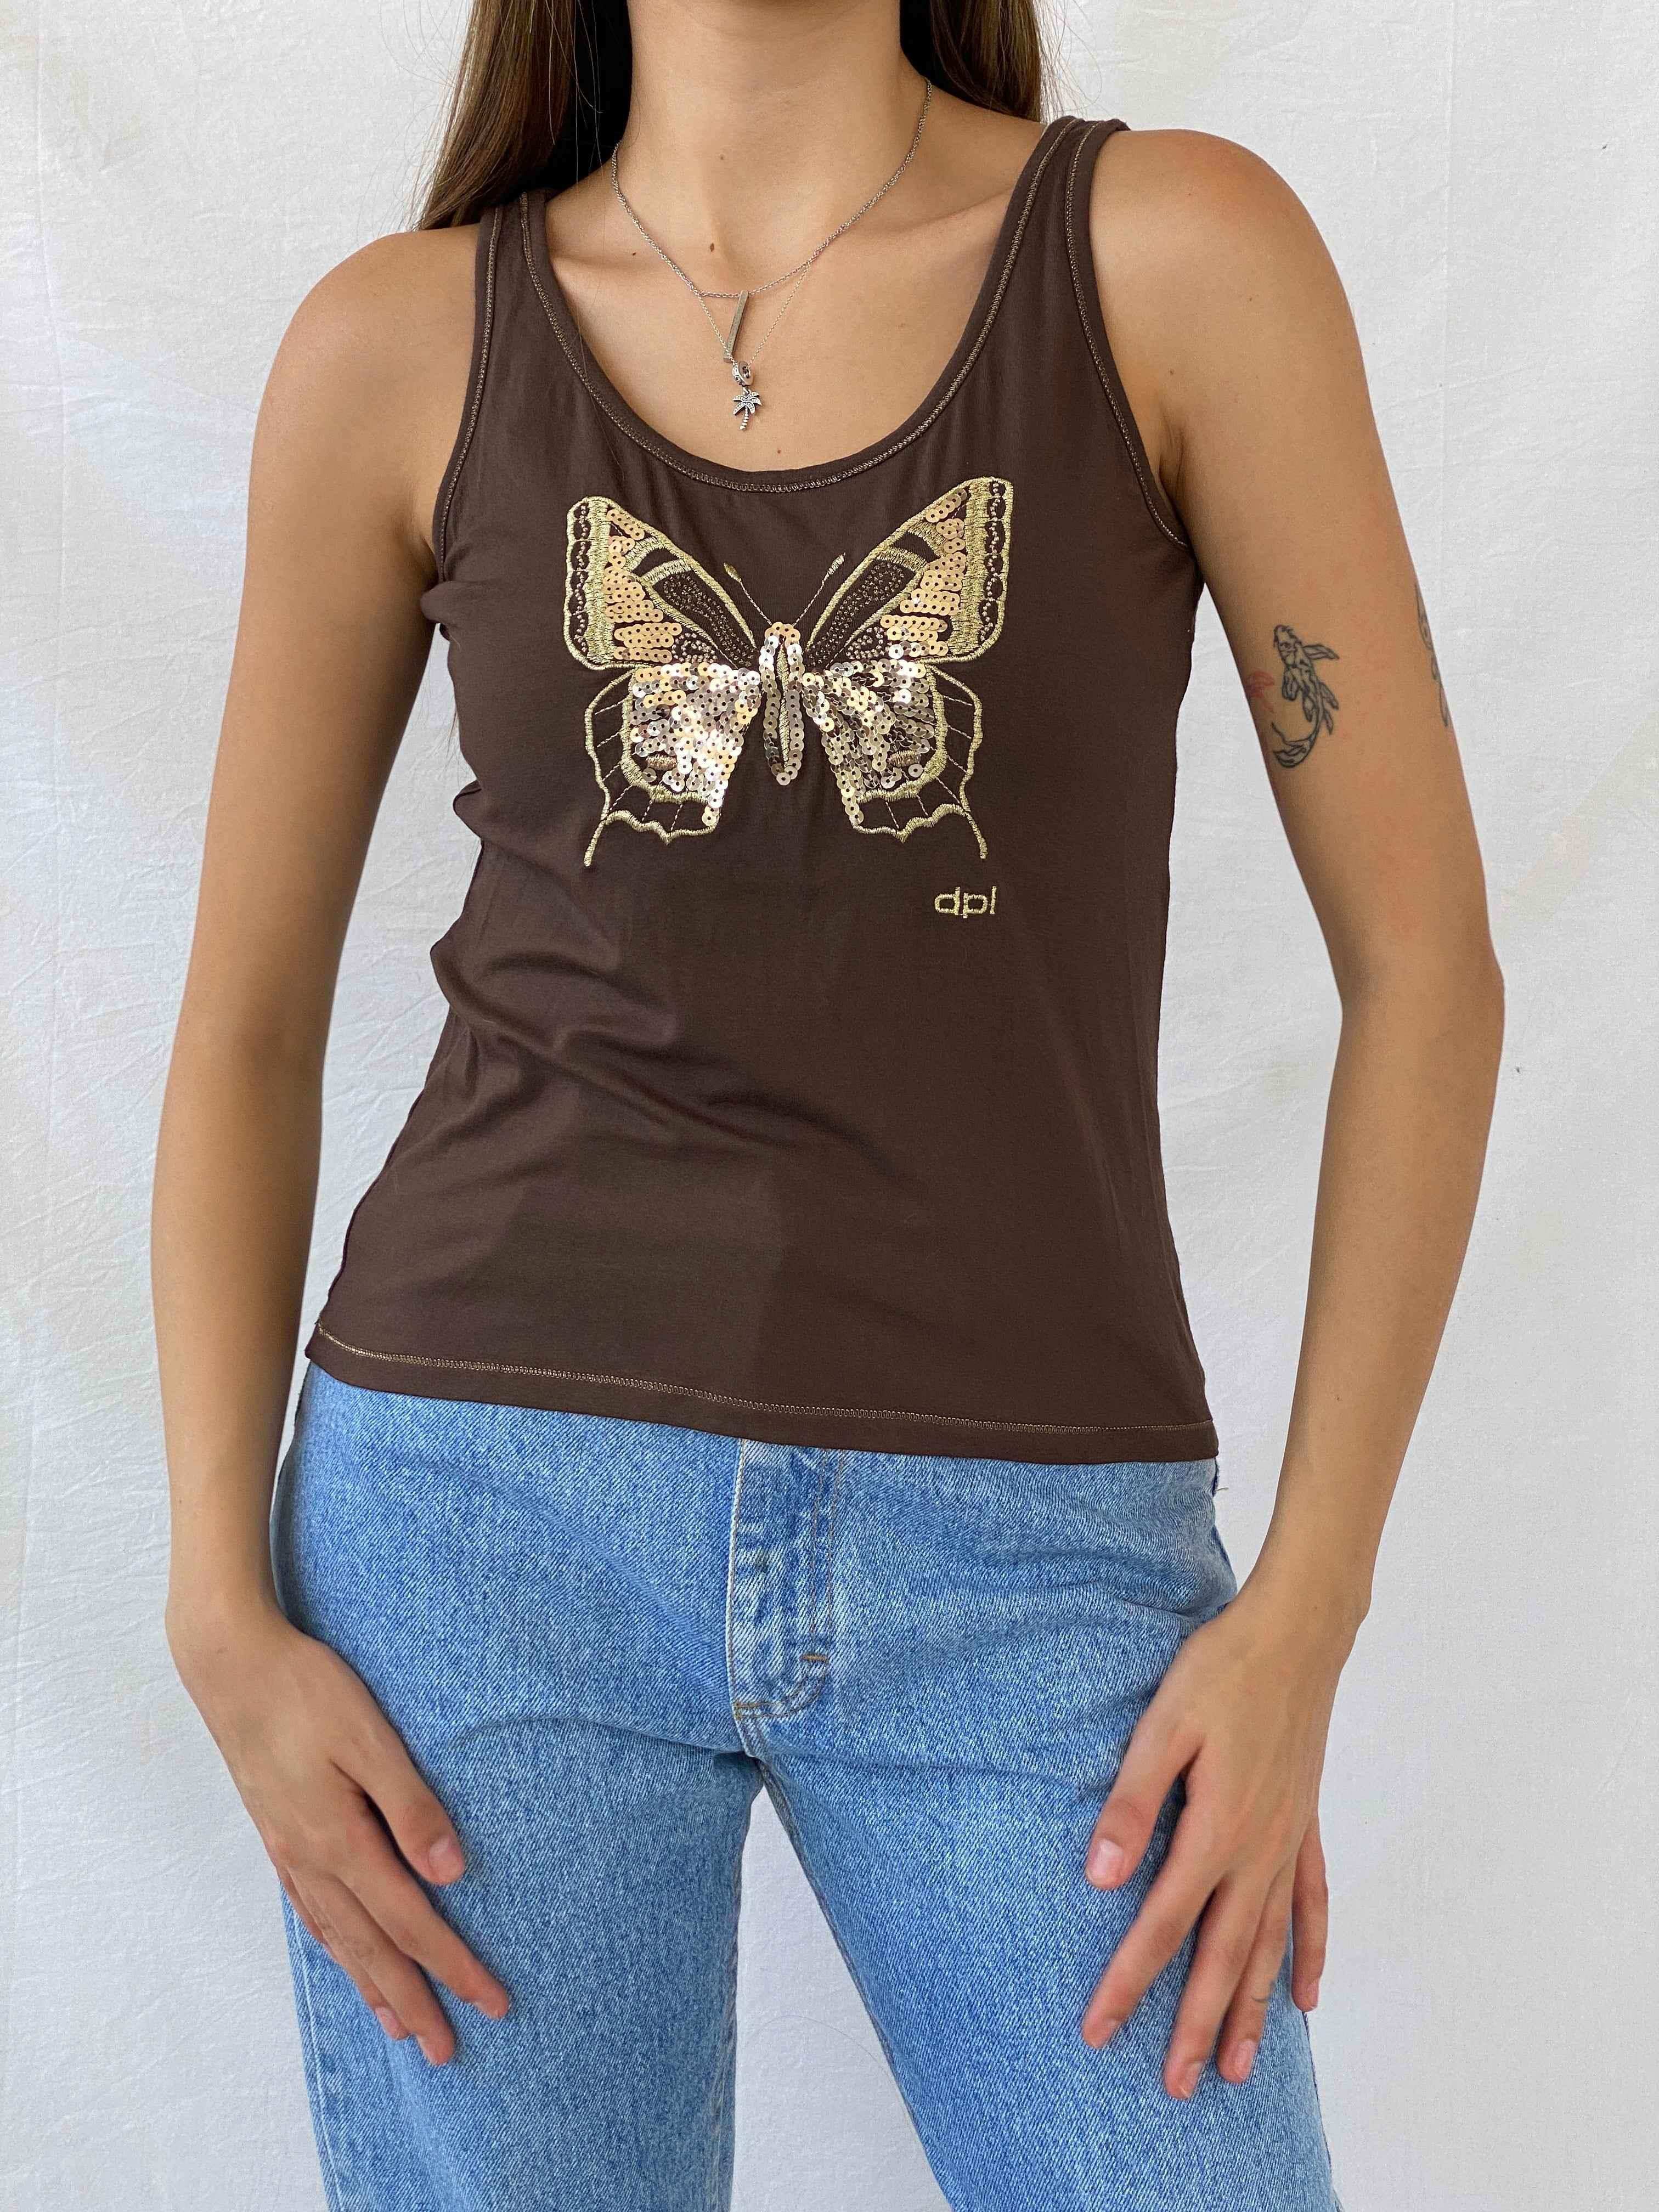 Y2K Derpouli Butterfly Top - Balagan Vintage Sleeveless Top 00s, consignment, Isabella, Mira